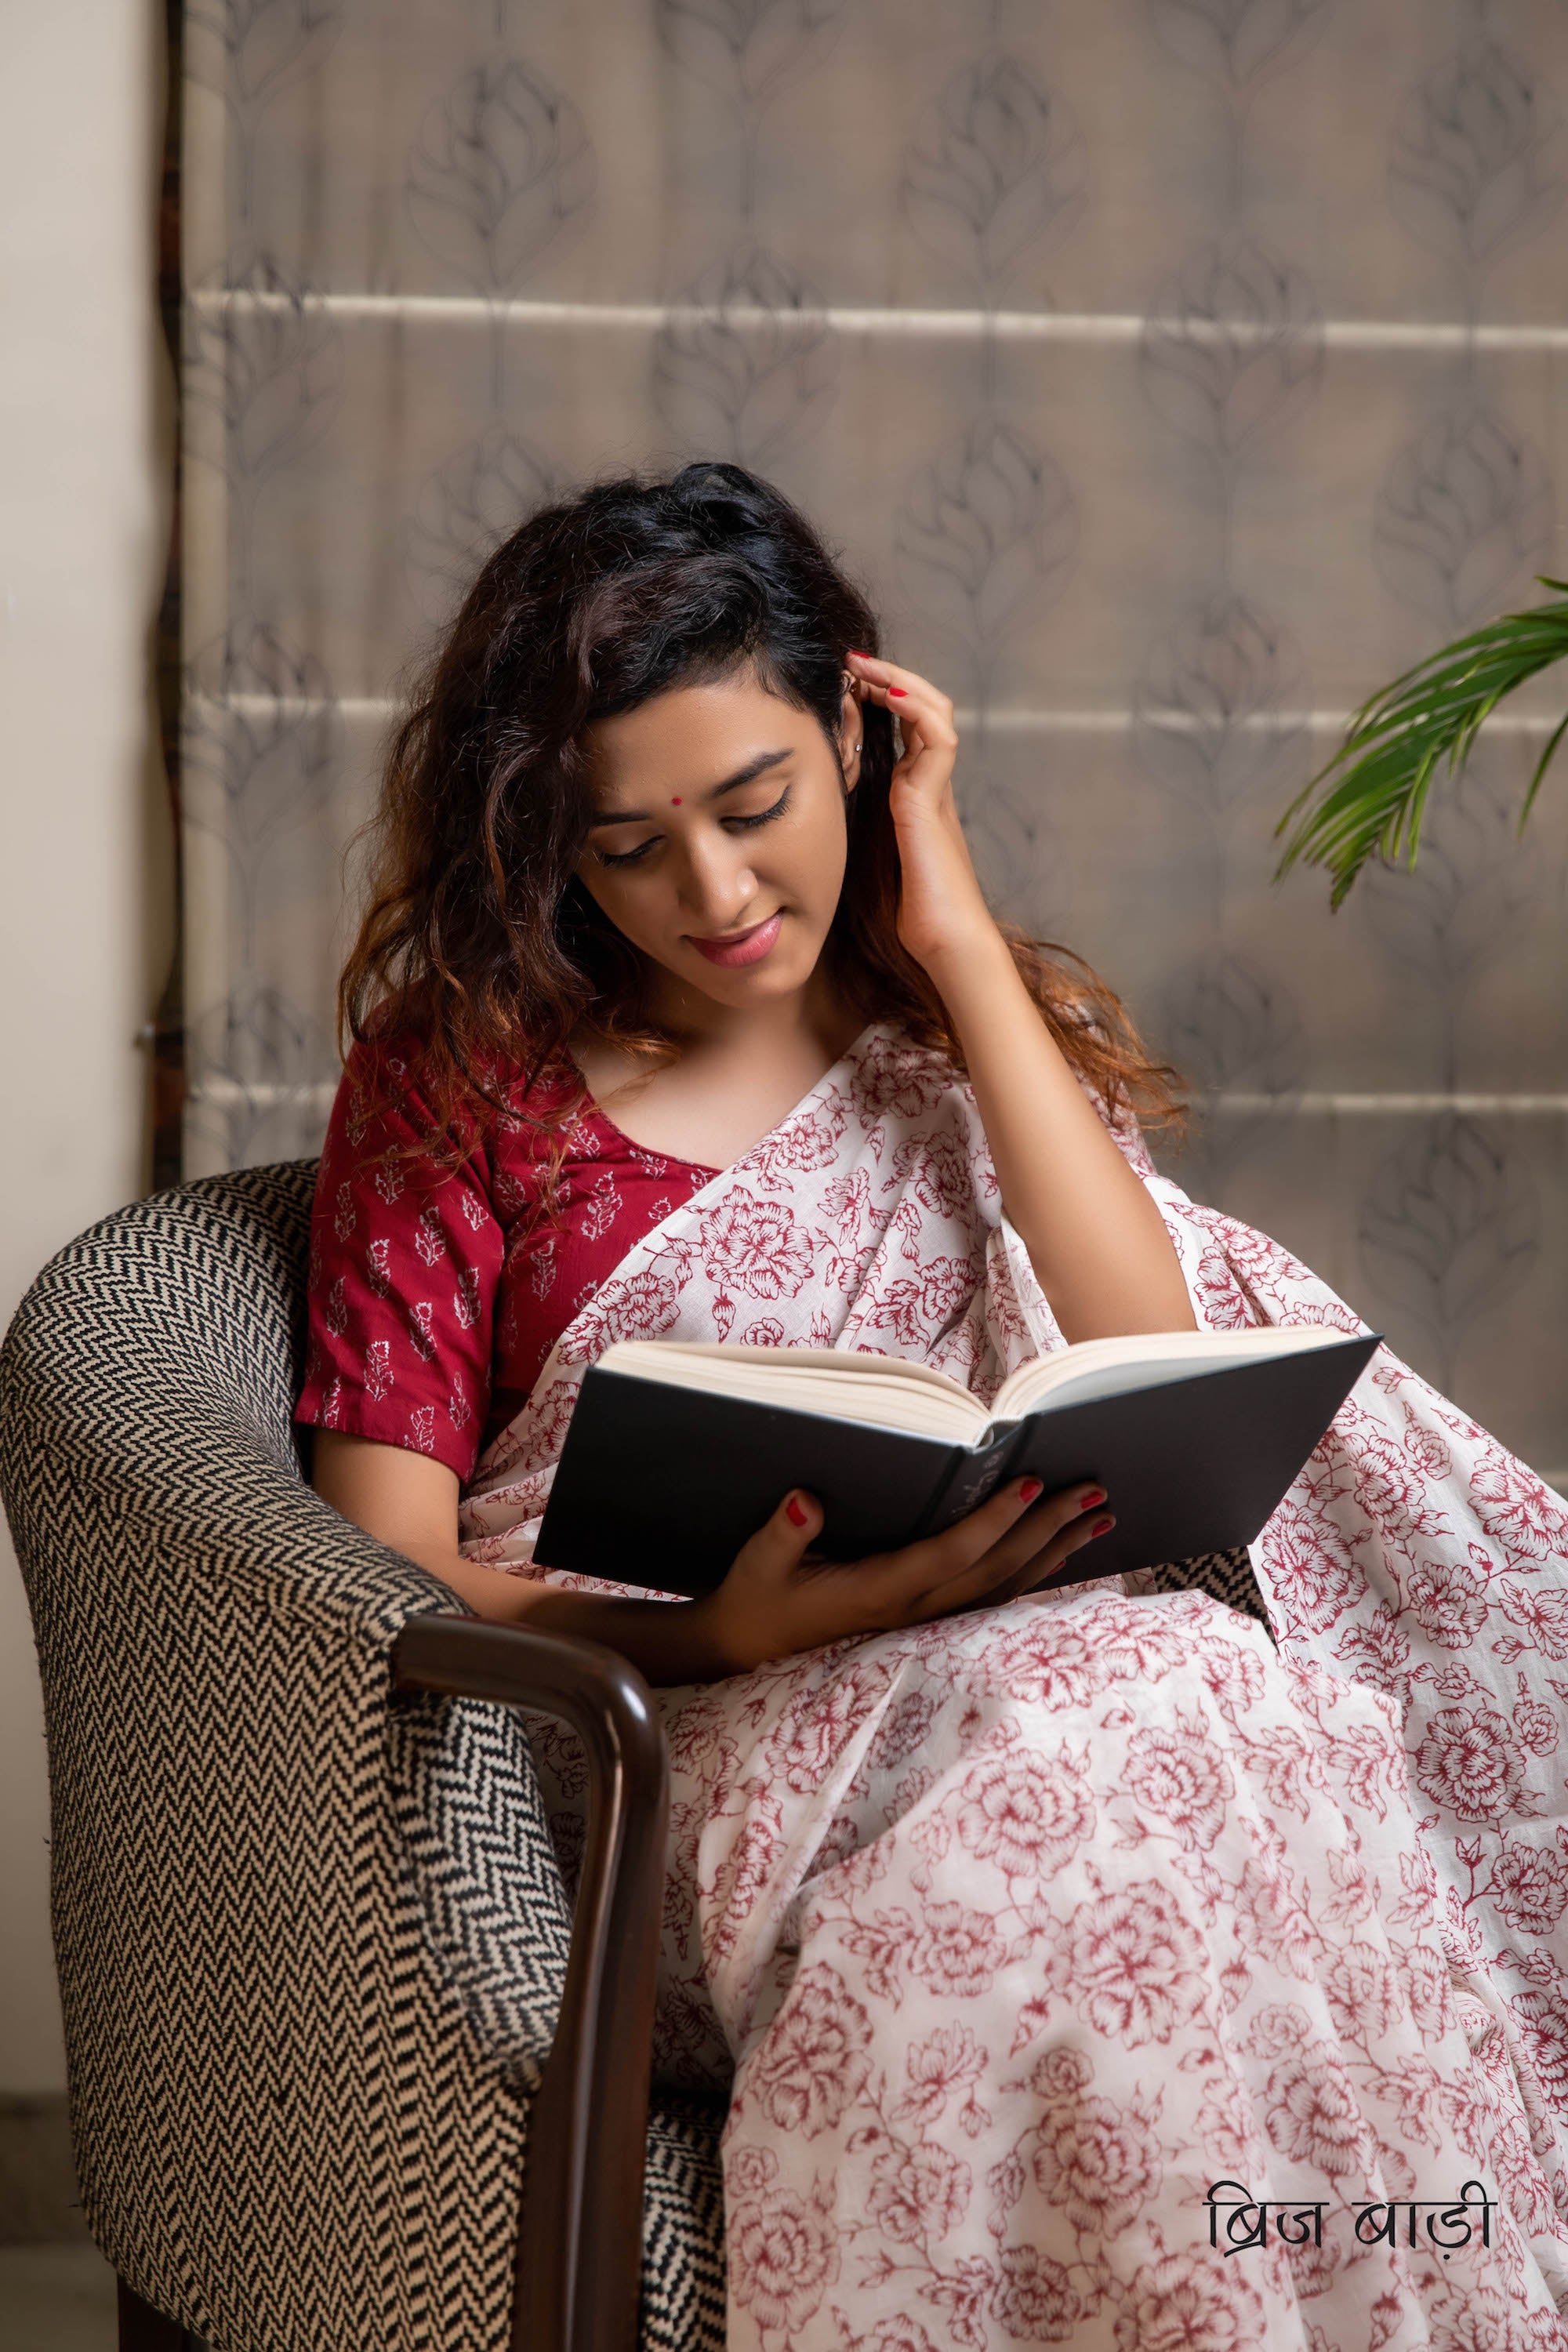 Girl Reading Book Collection Different Poses Stock Illustration 1088285495  | Shutterstock